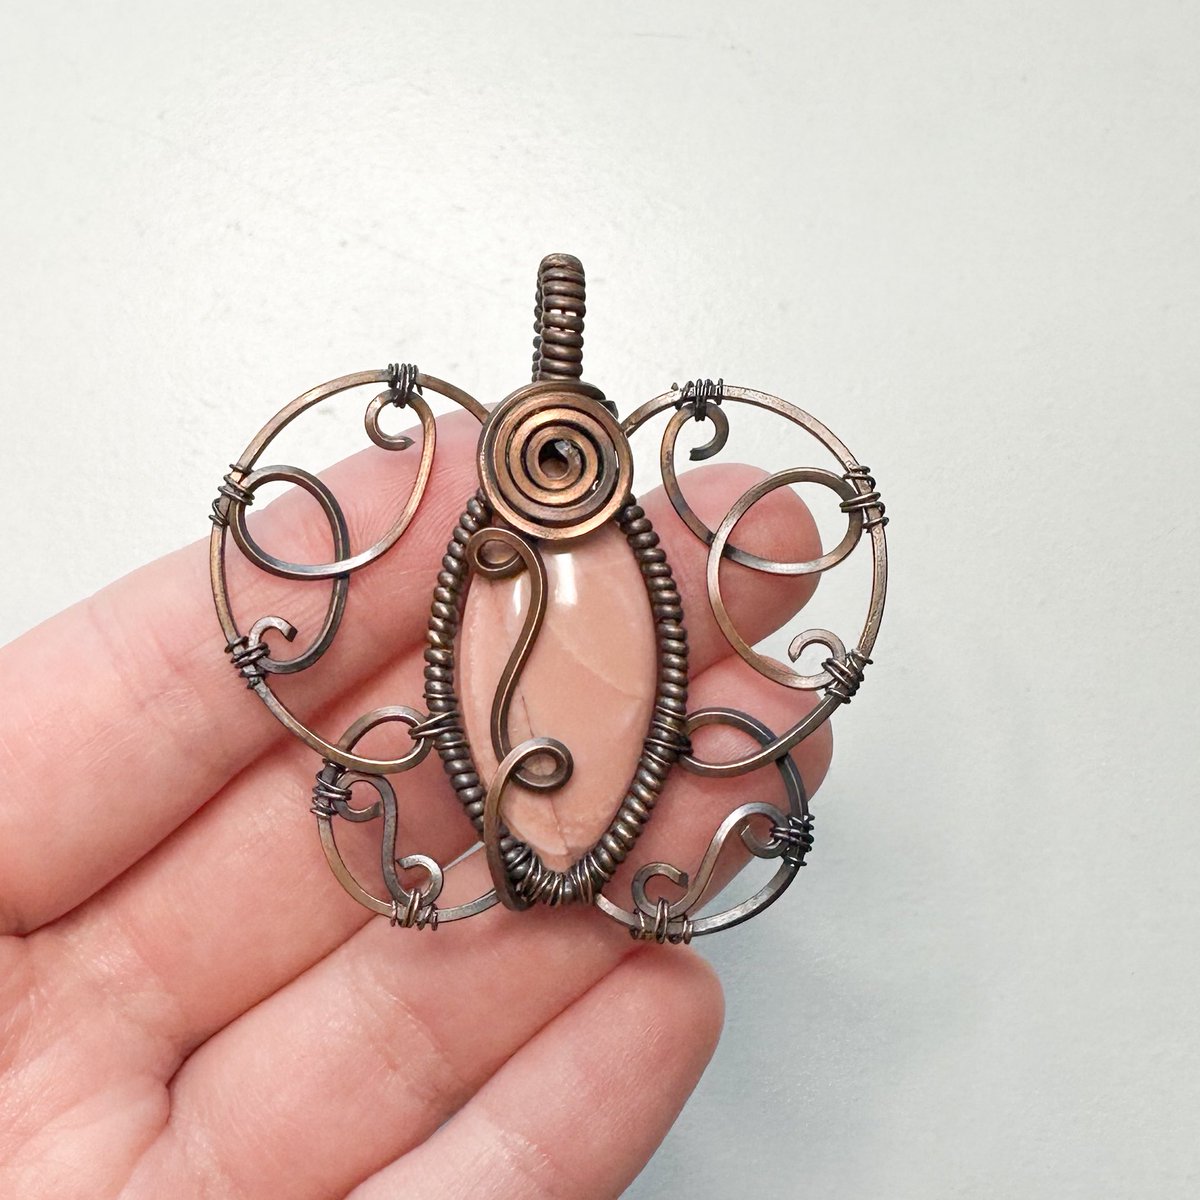 30 minutes til my collection drops! Nerves are racing ahhh😥😬 this pink opal butterfly along with many other pendants will be available then <3